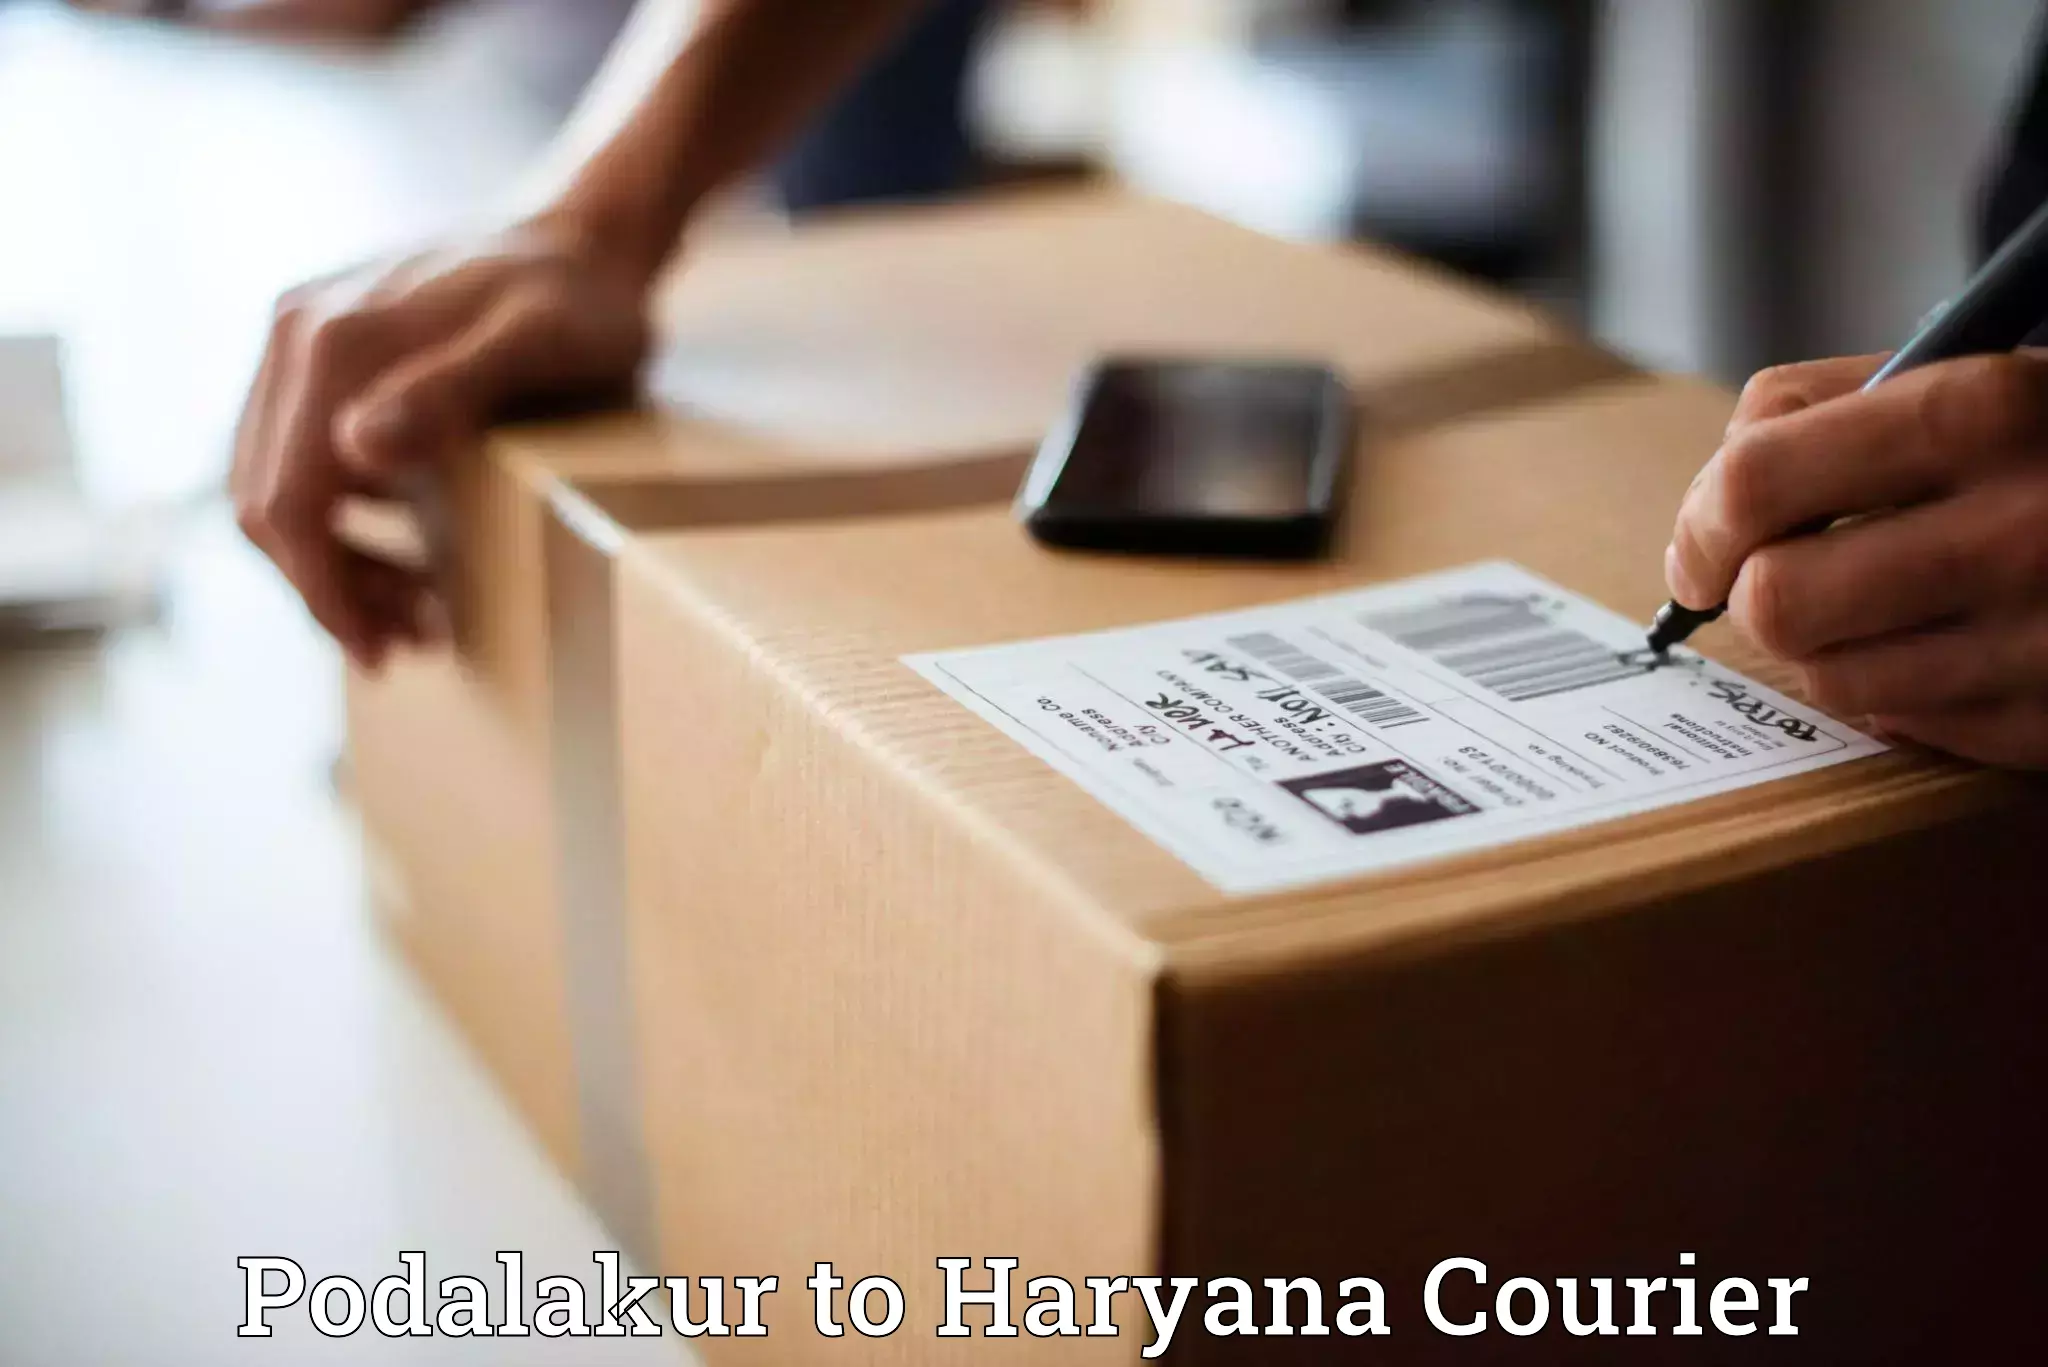 Personalized courier solutions Podalakur to Chaudhary Charan Singh Haryana Agricultural University Hisar